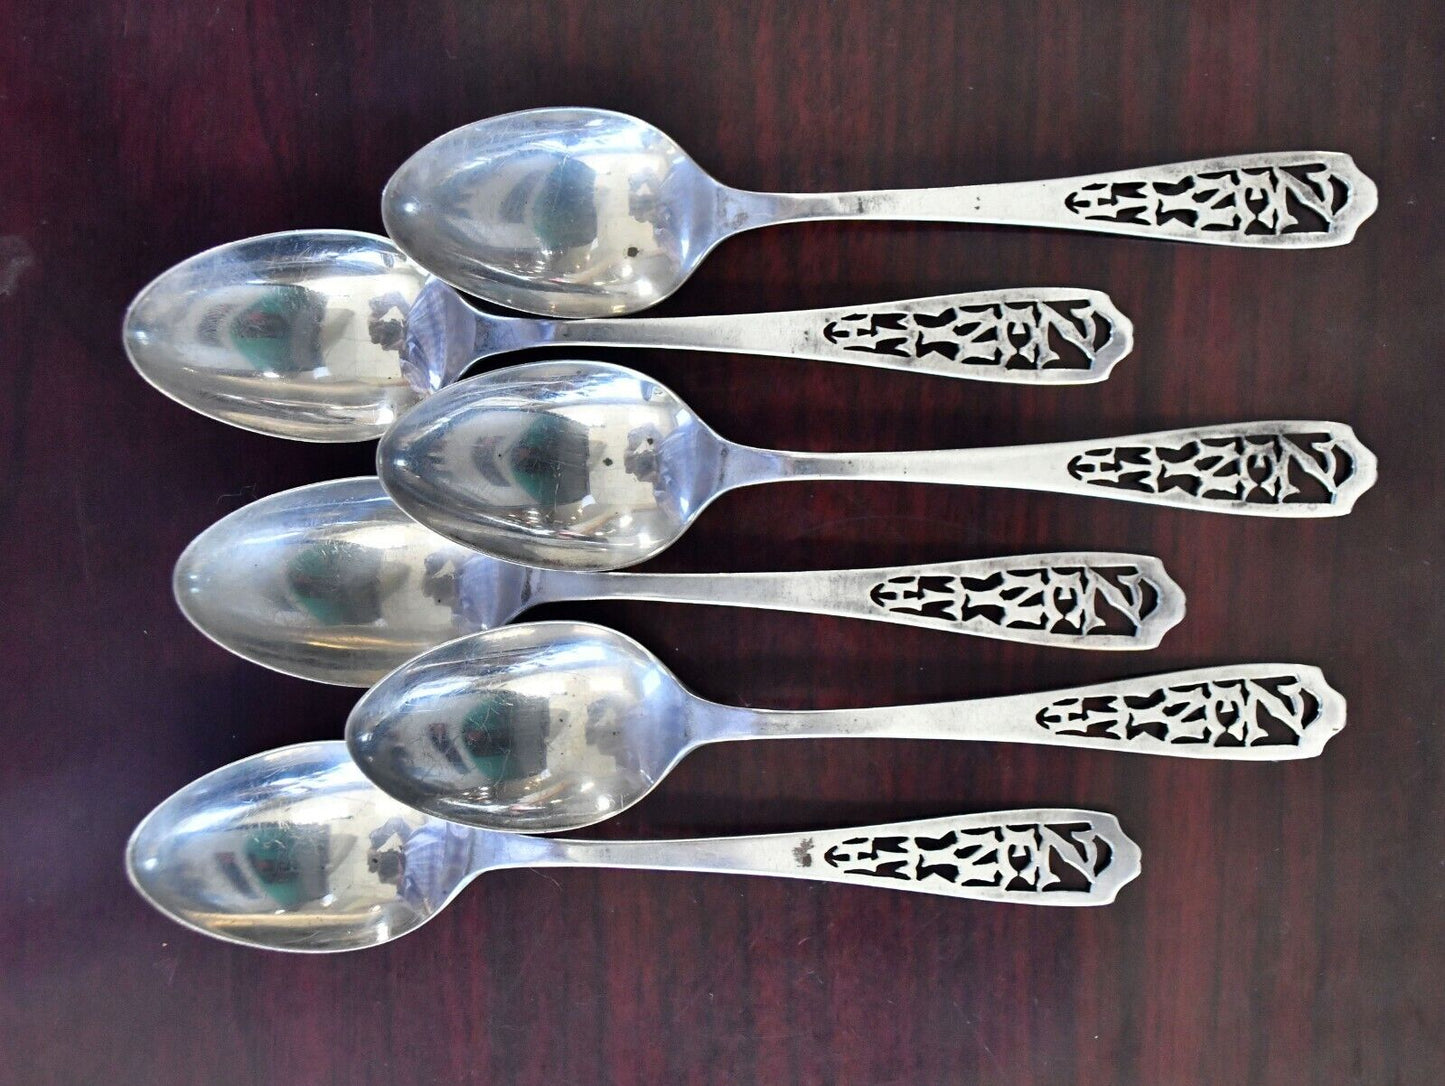 Set of 6 Zenith Sterling Silver Teaspoons by 5 3/8" Sterling Silver MFG Co.